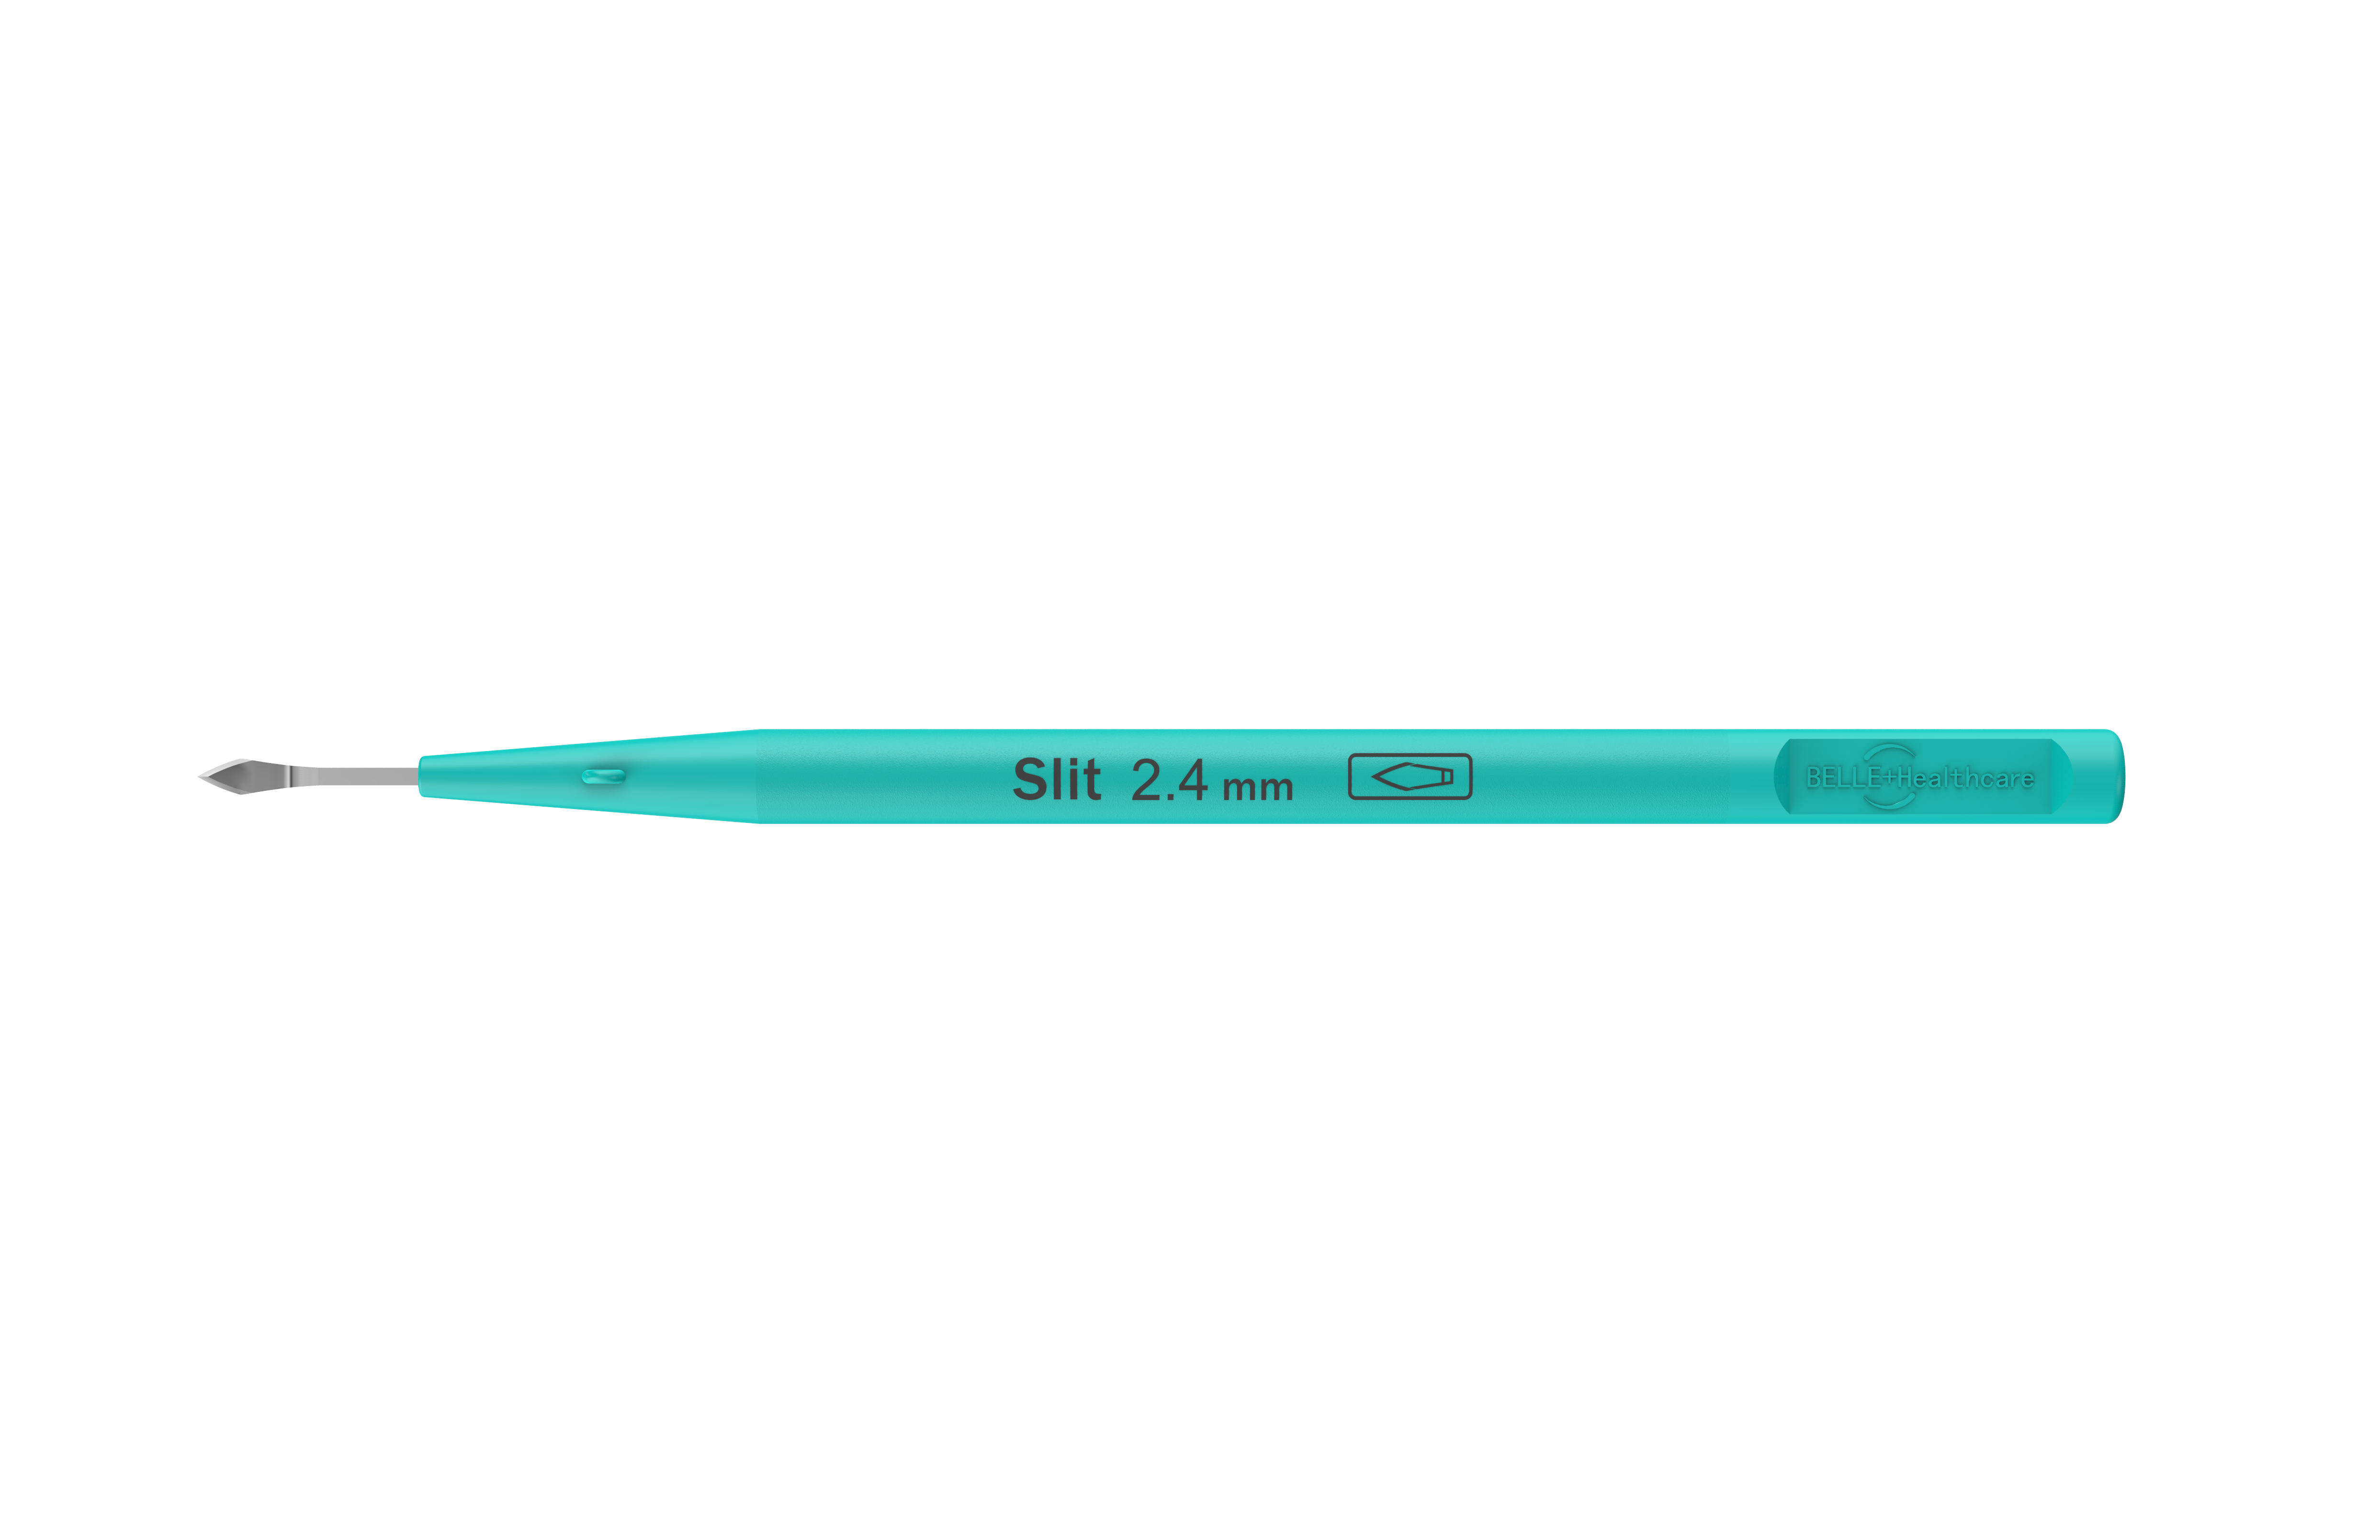 BK-1280B Disposable Ophthalmic Knives